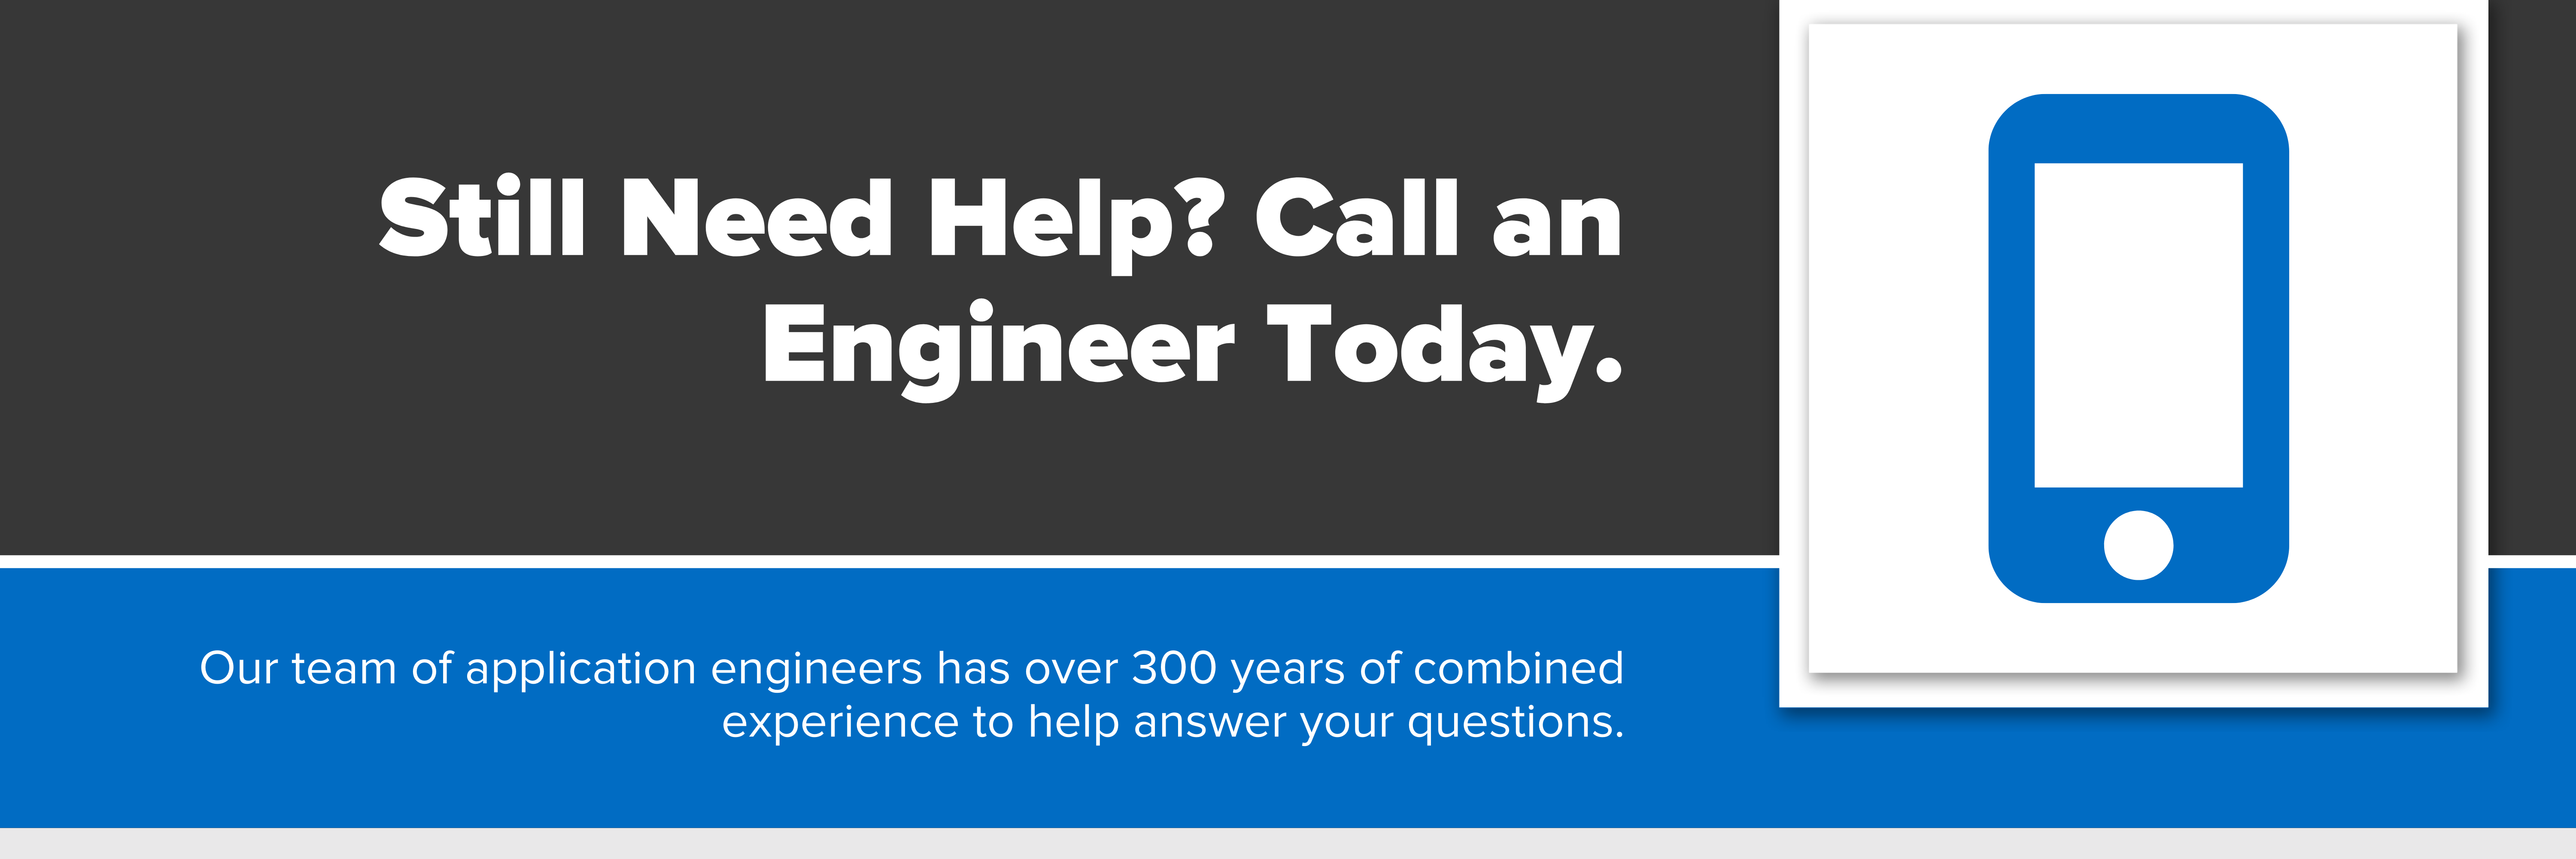 Header image with text "Still Need Help? Call an Engineer Today."